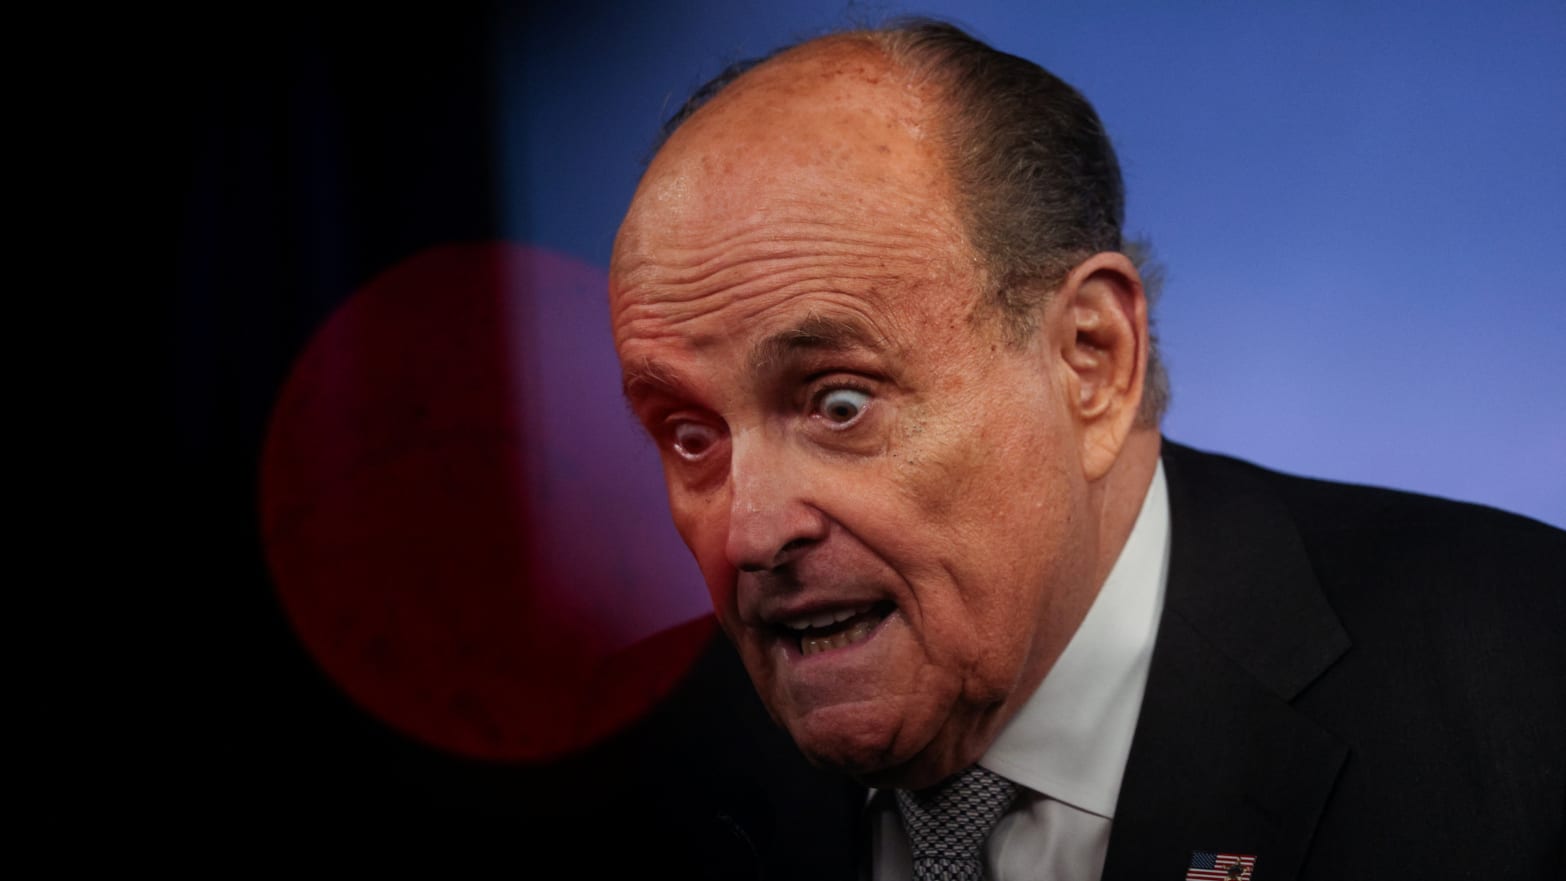 Rudy Giuliani gives remarks during a 9/11 memorial ceremony in 2022.